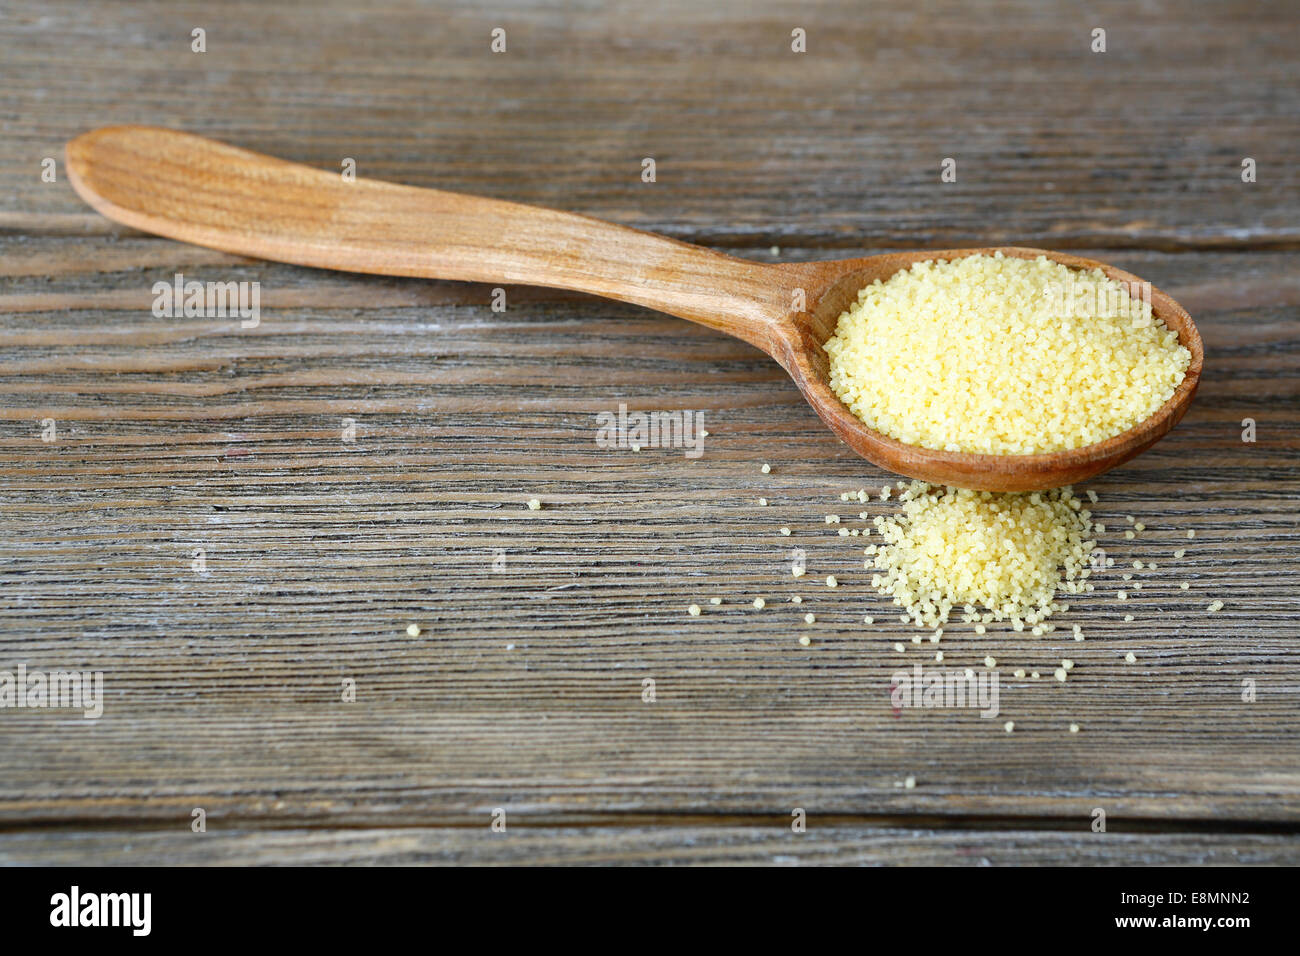 Couscous in a wooden spoon on boards, food close up Stock Photo